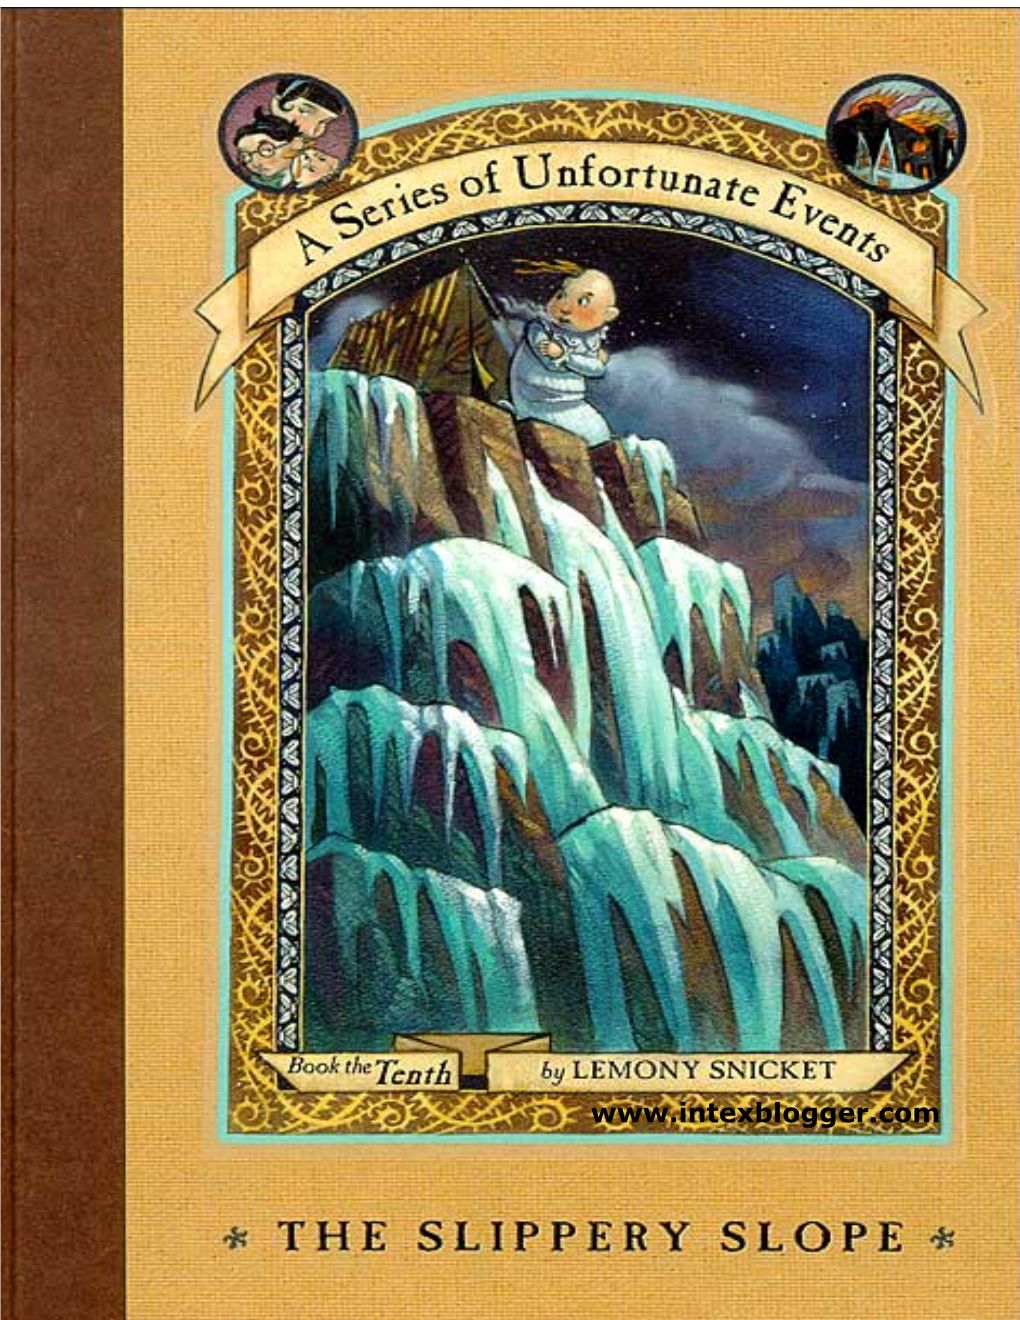 THE SLIPPERY SLOPE" a Series of Unfortunate Events Book 10